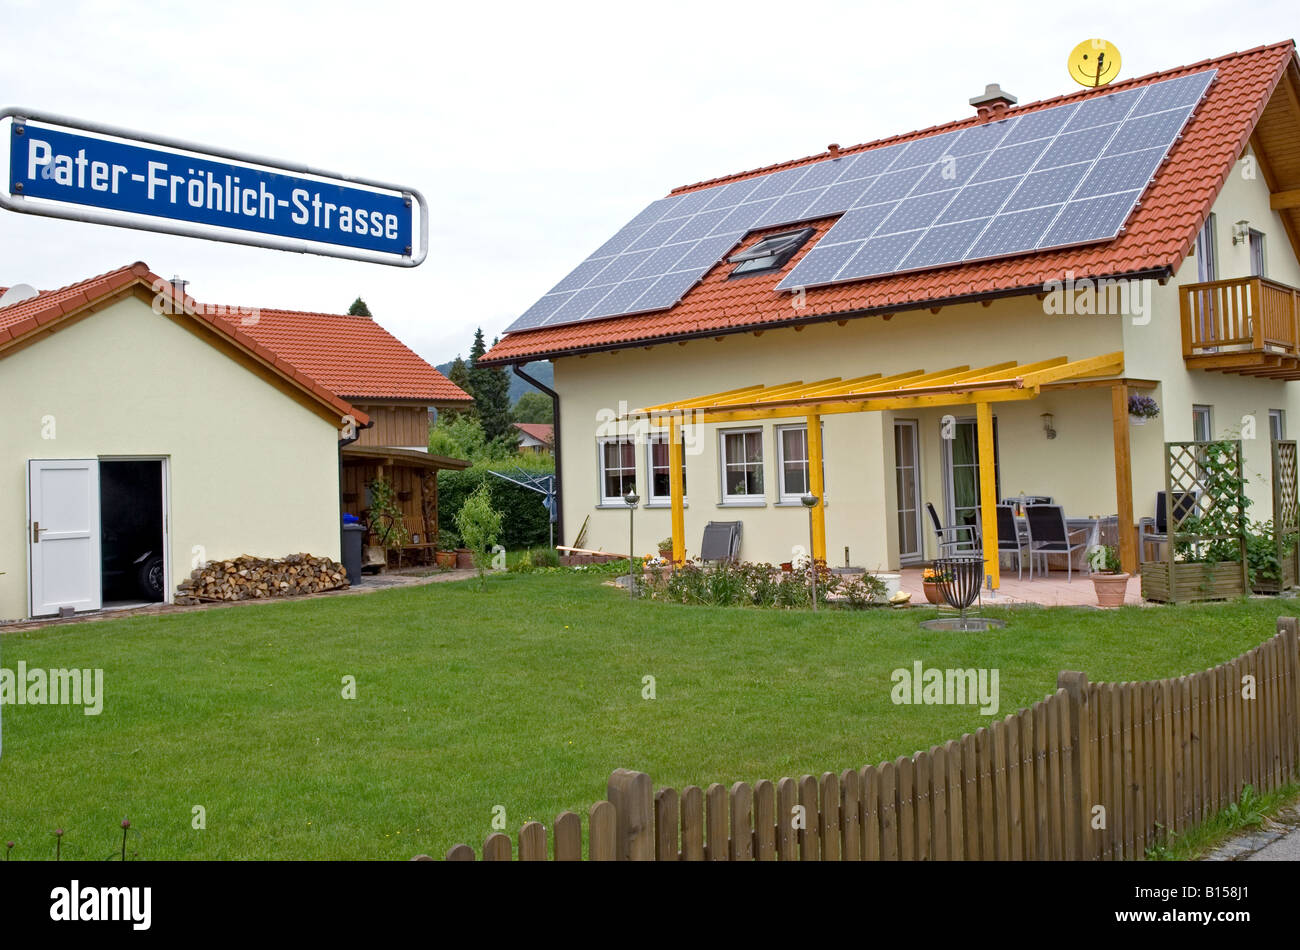 Solar panels fitted to the roof of a house in the village of Marktl near Altutting, Bavaria, Germany. Stock Photo